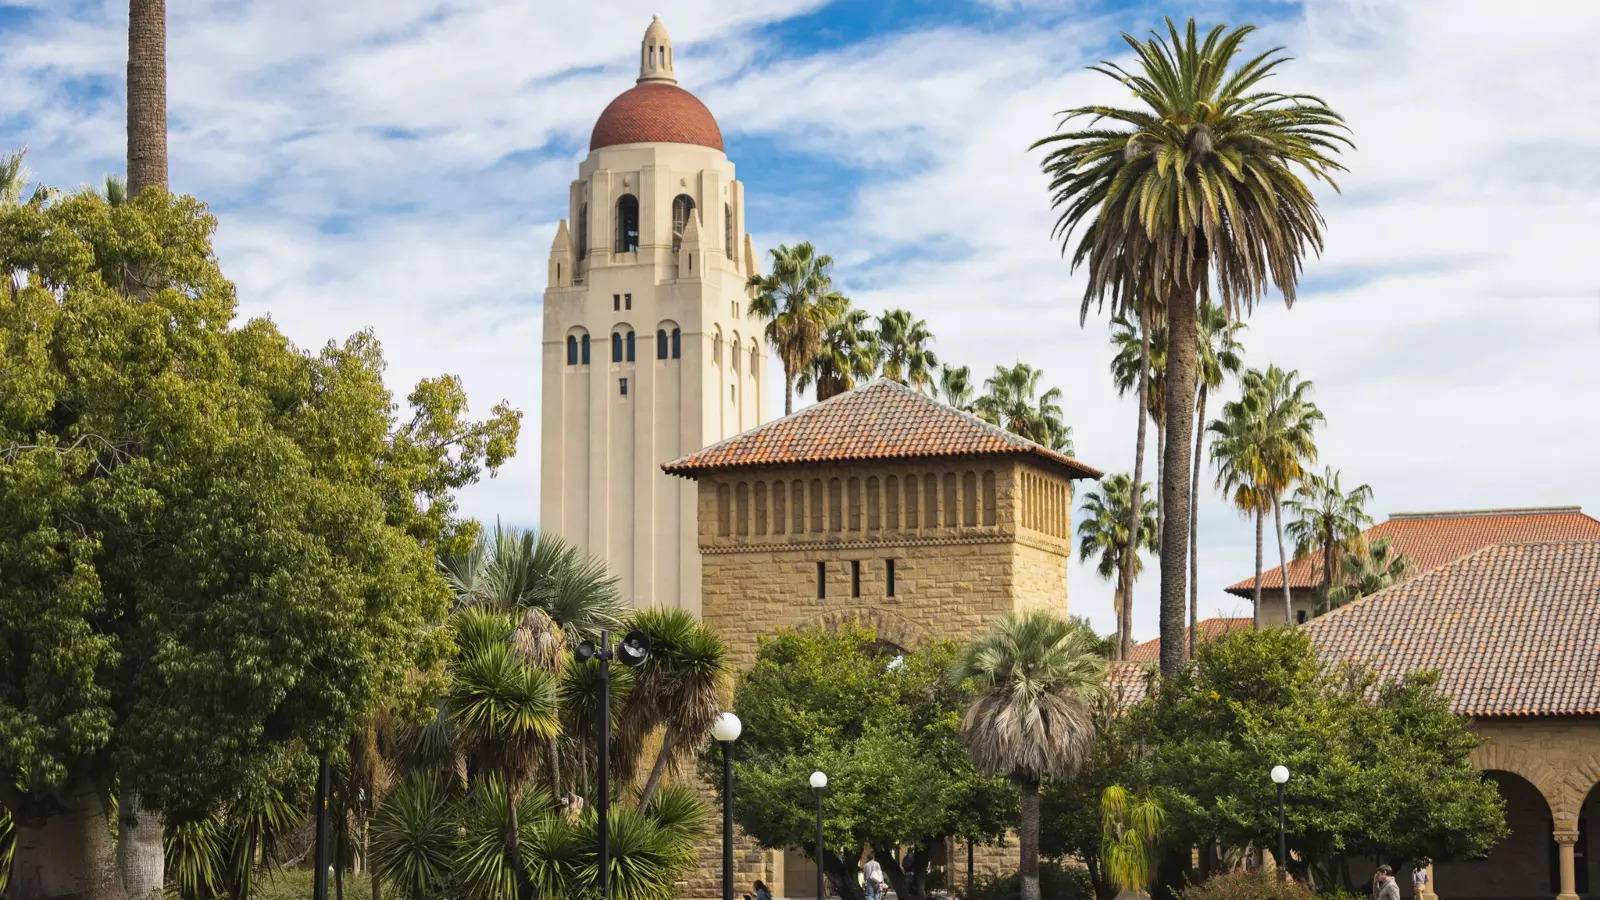 Stanford University's 105-year-old woman student returns after 83 years to become graduate. Why did she leave campus? 